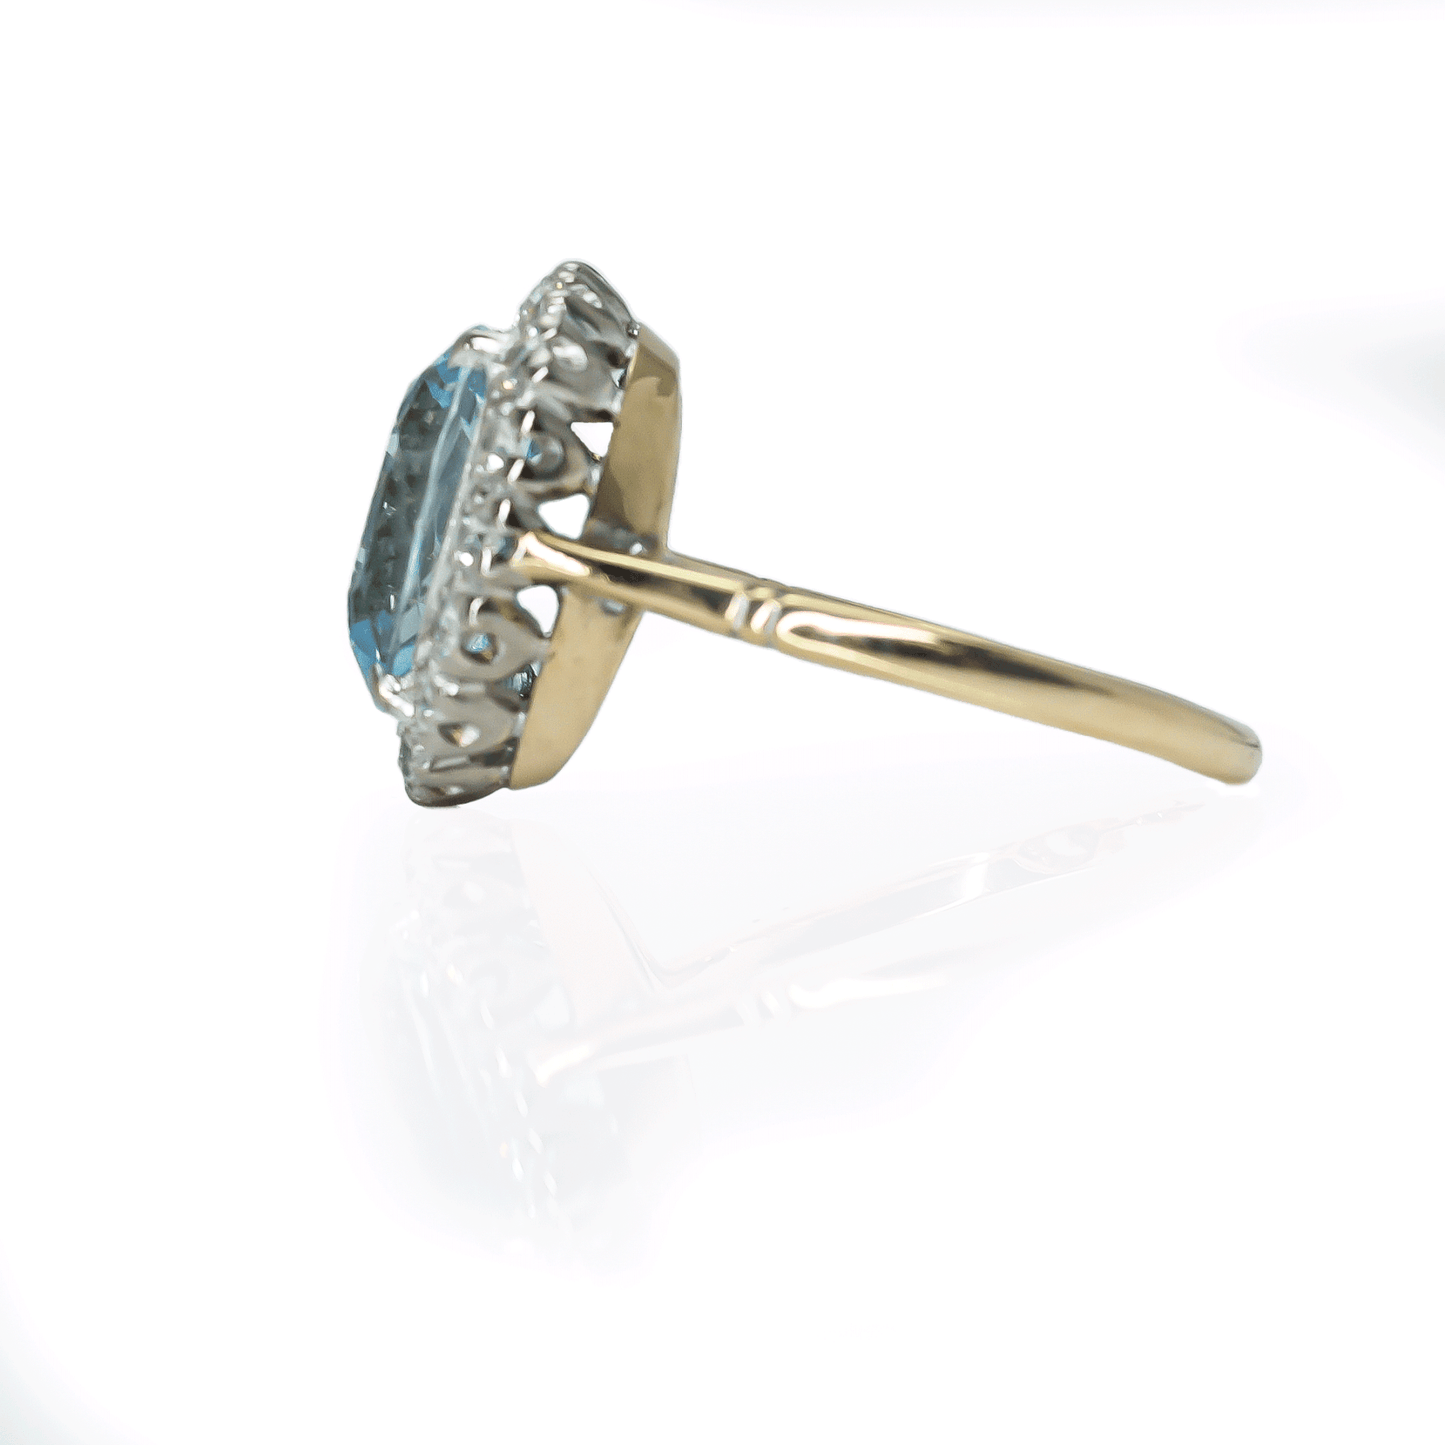 Vintage Aquamarine and Diamond Oval Cluster Ring - Friar House